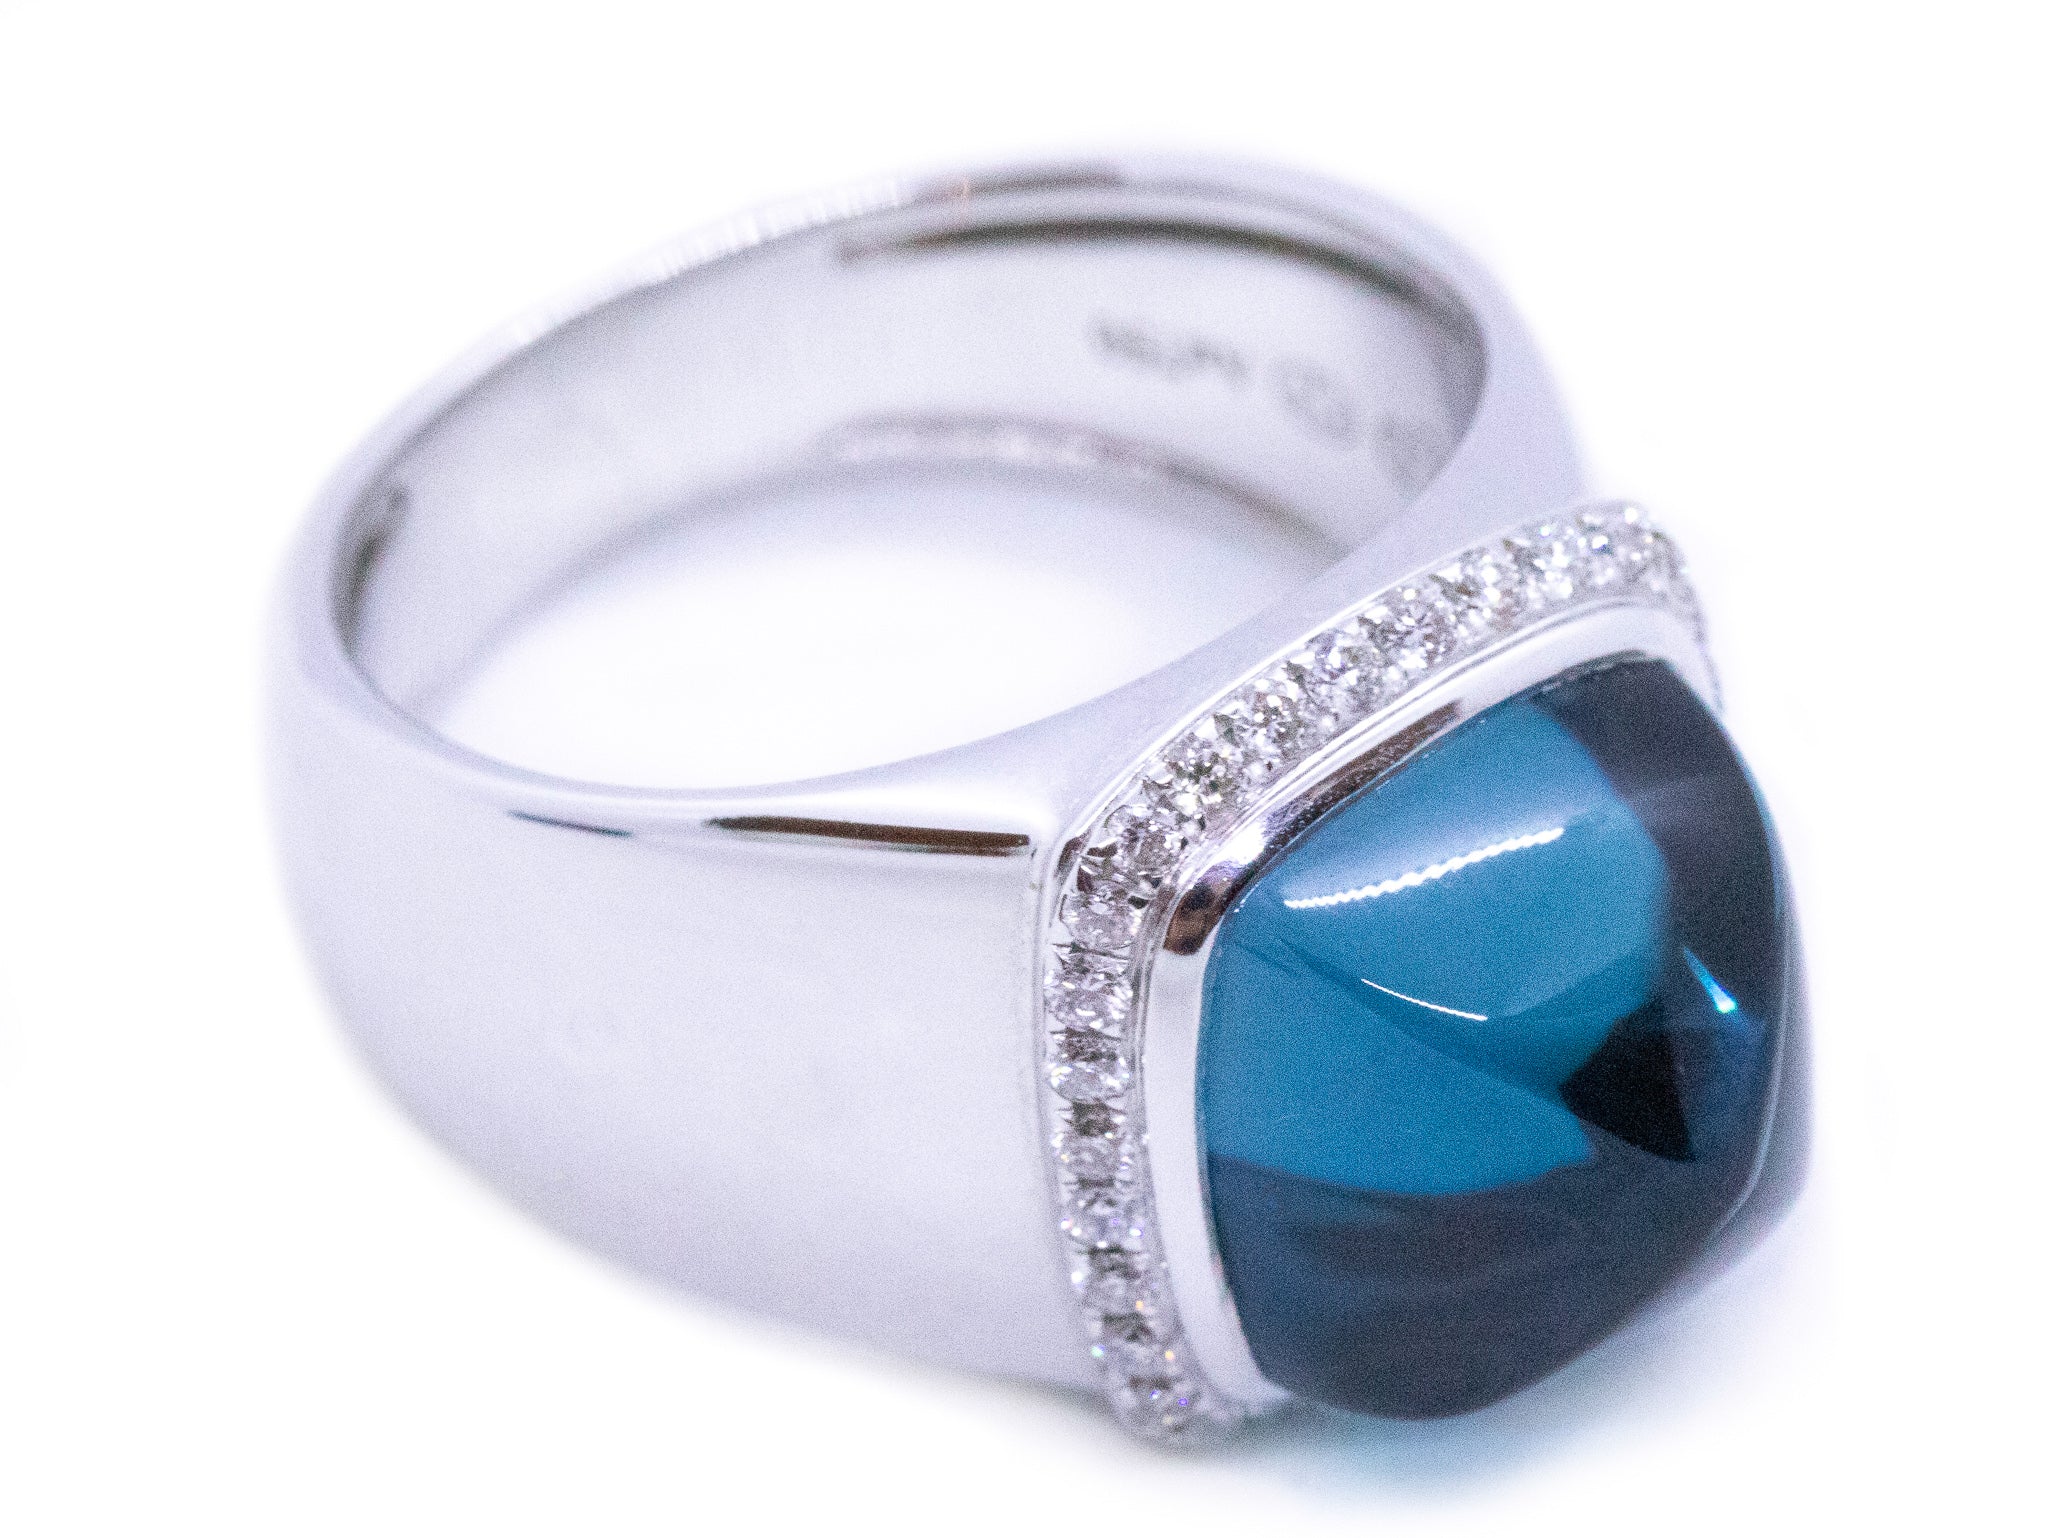 FRED PARIS 18 KT DIAMOND RING WITH SUGARLOAF CABOCHON TOPAZ